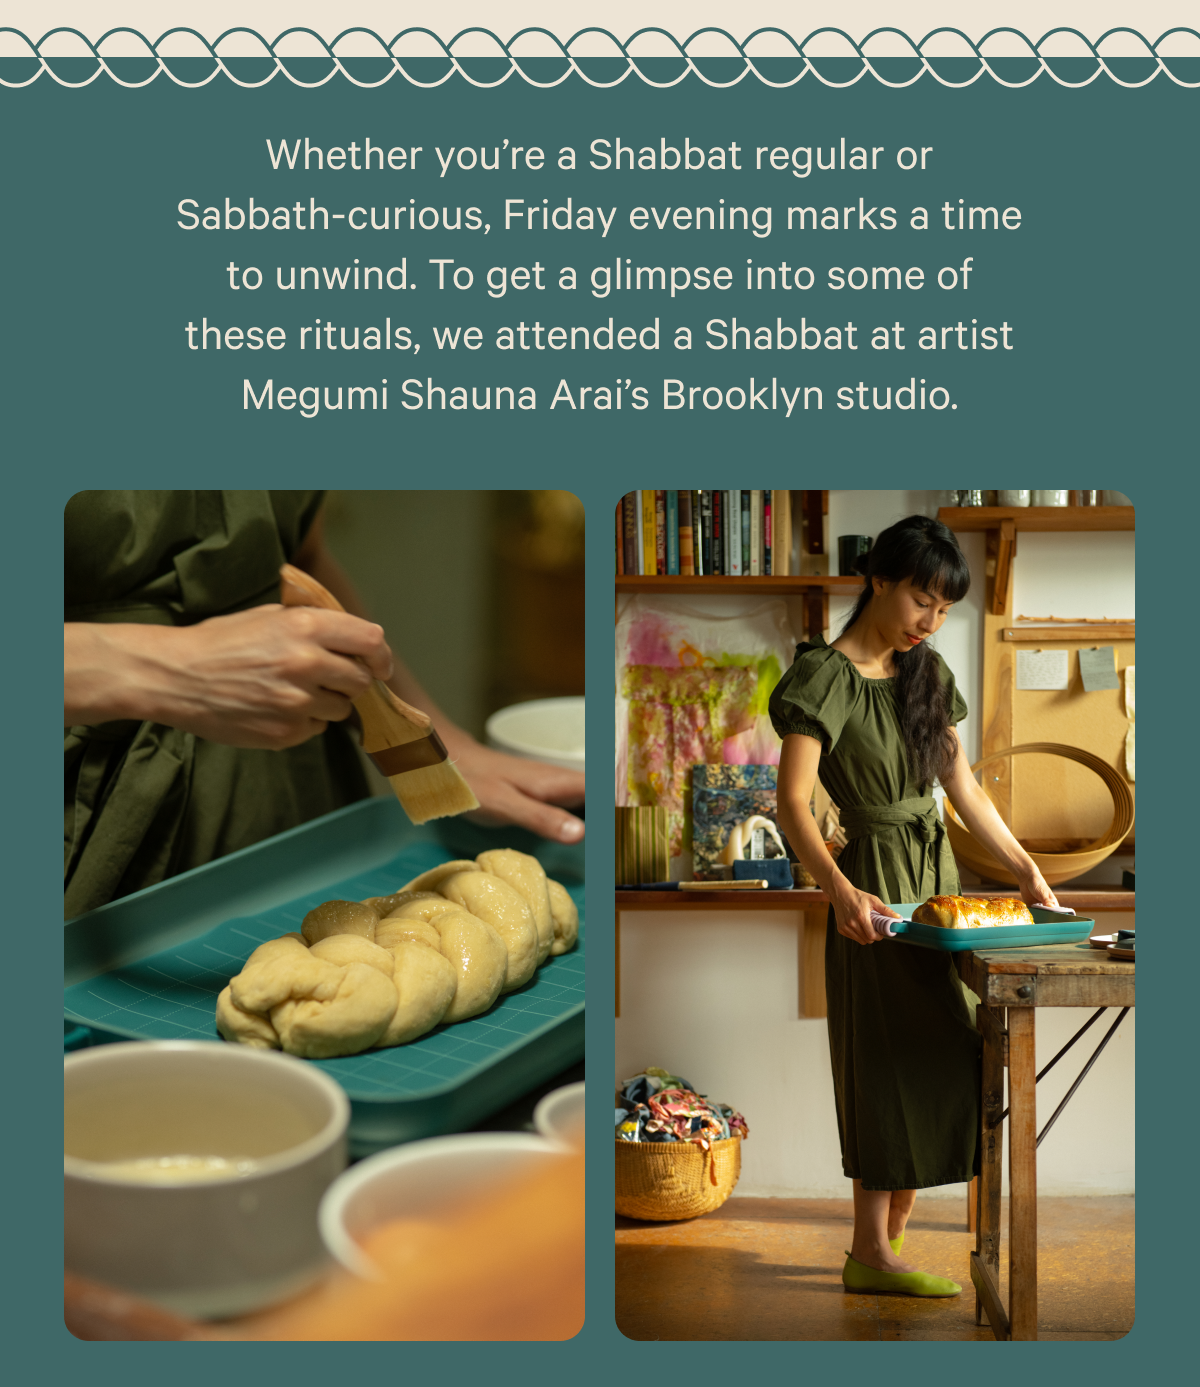 Whether you’re a Shabbat regular or Sabbath-curious, Friday evening marks a time to unwind. To get a glimpse into some of these rituals, we attended a Shabbat at artist Megumi Shauna Arai’s Brooklyn studio.